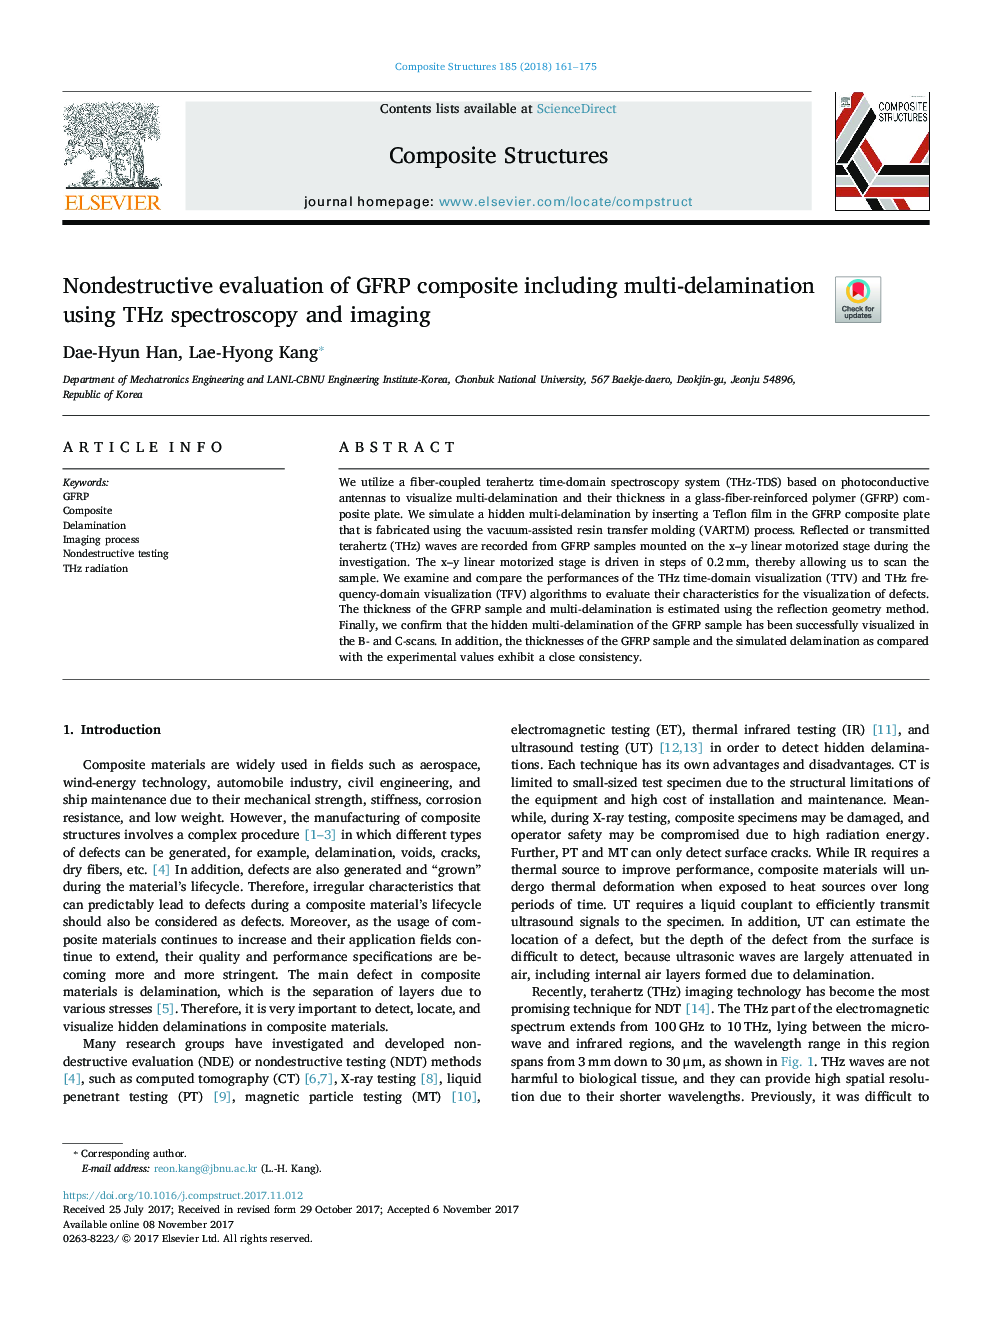 Nondestructive evaluation of GFRP composite including multi-delamination using THz spectroscopy and imaging